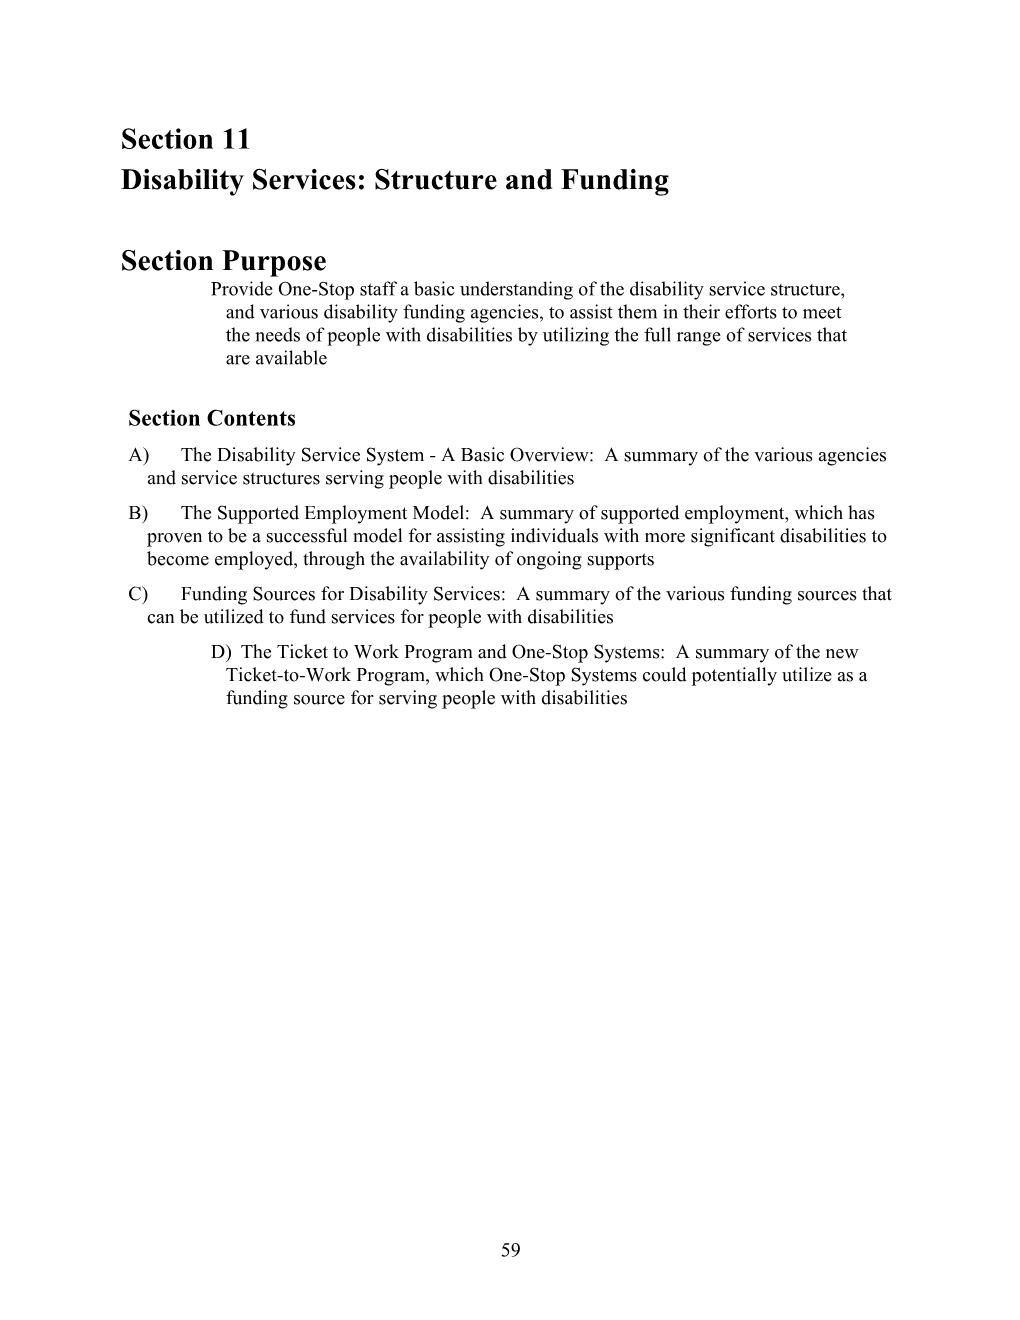 Disability Services: Structure and Funding